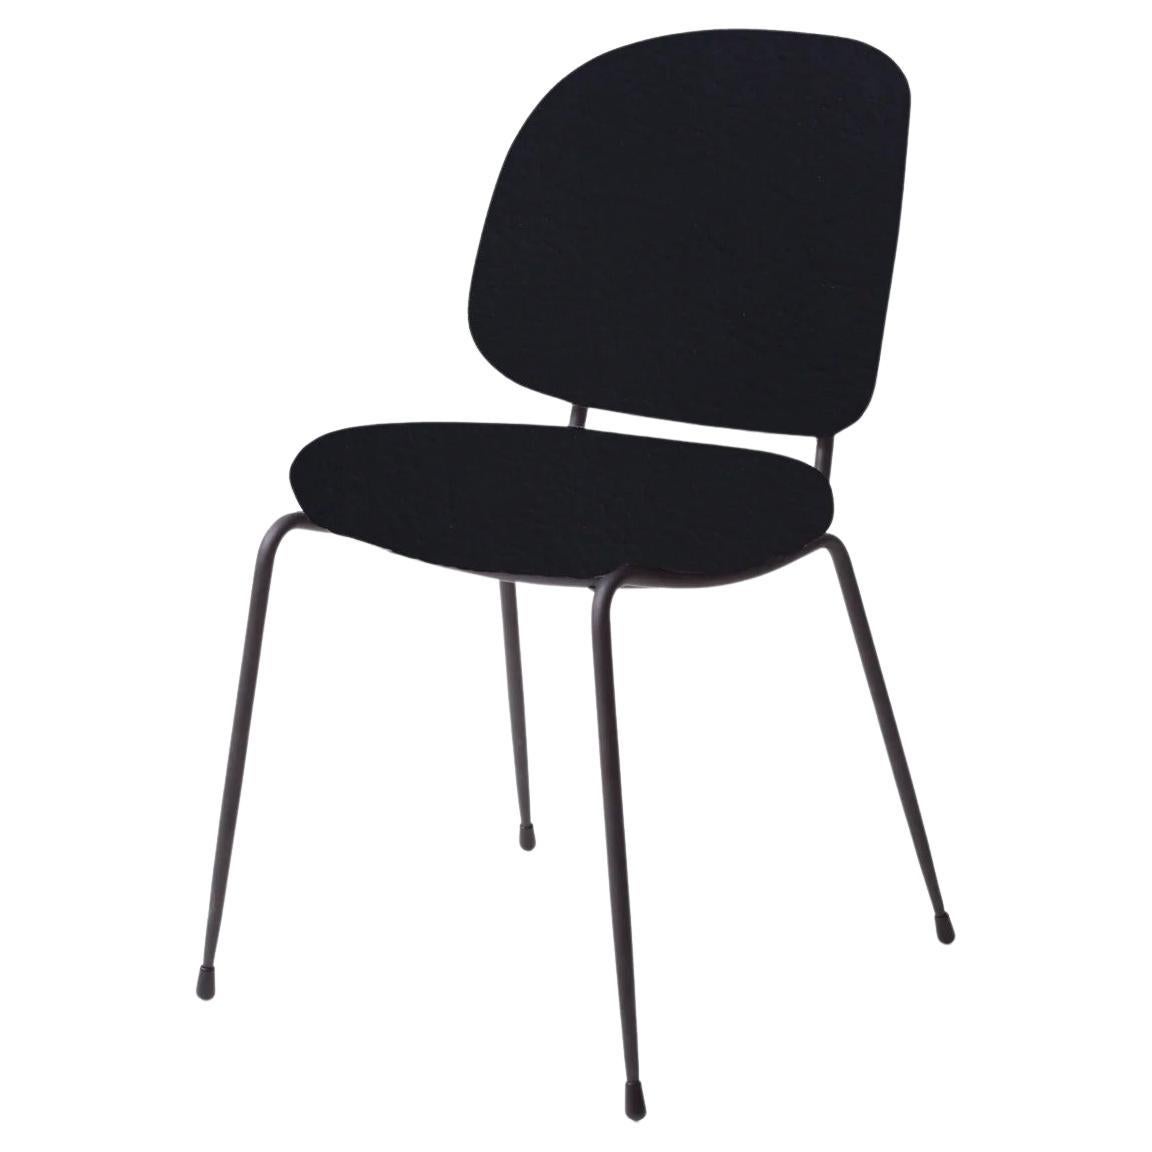 Black Leather And Steel Dining Chair, Industry For Sale